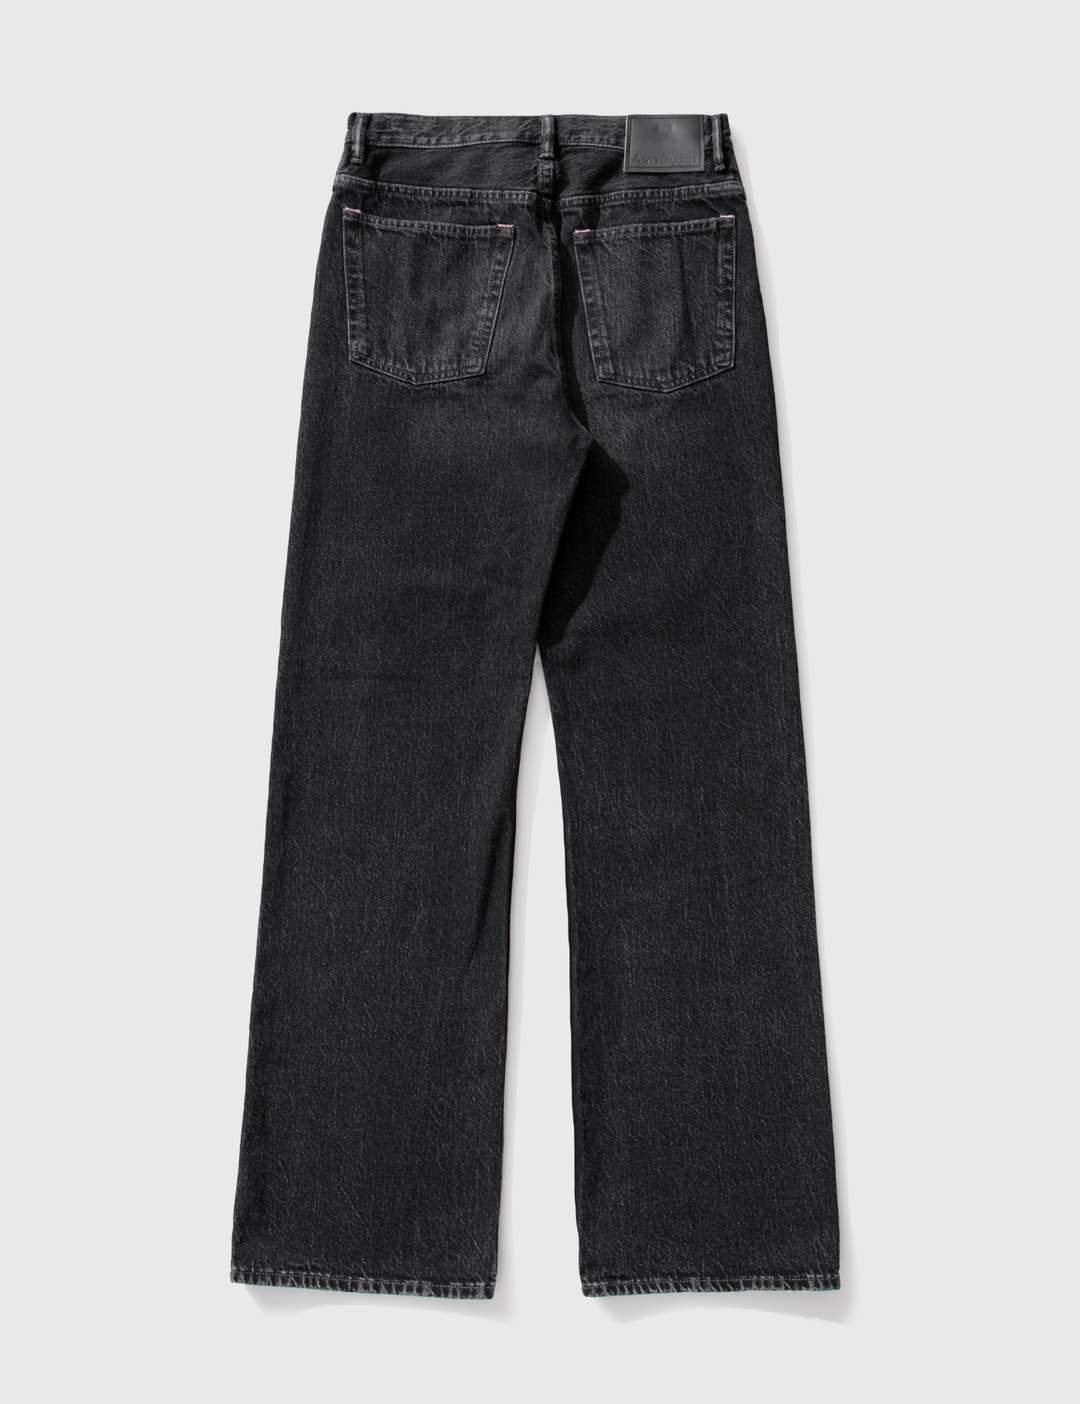 Acne Studios - 2021M Vintage Jeans | HBX - Globally Curated Fashion and ...